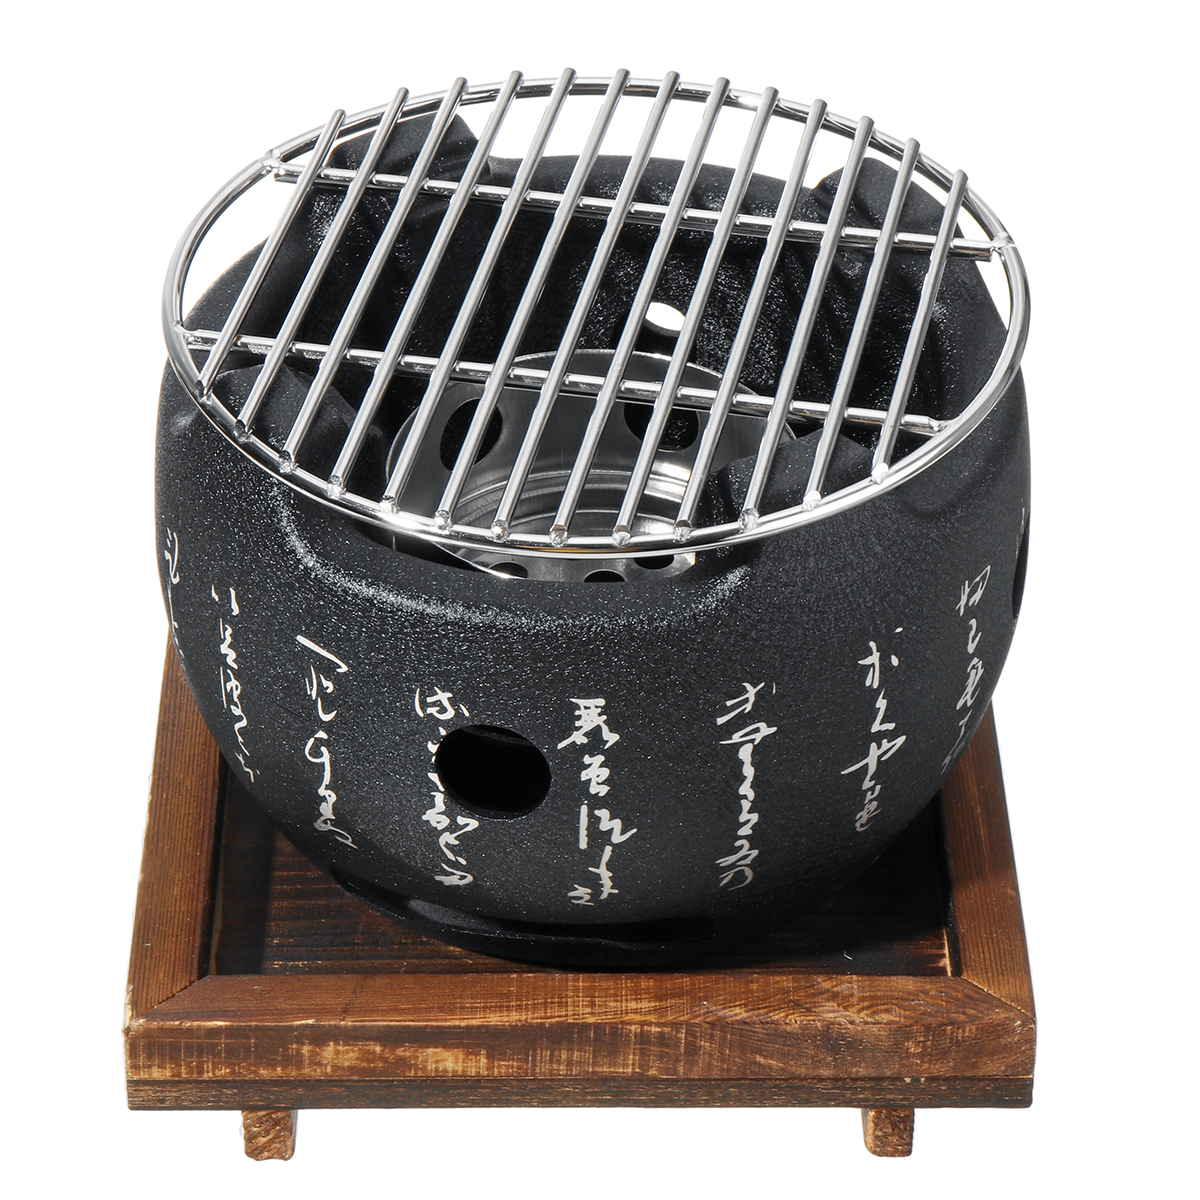 Table Top Outdoor BBQ Grill BBQ Grill Charcoal Grill Japanese Style - image 1 of 11